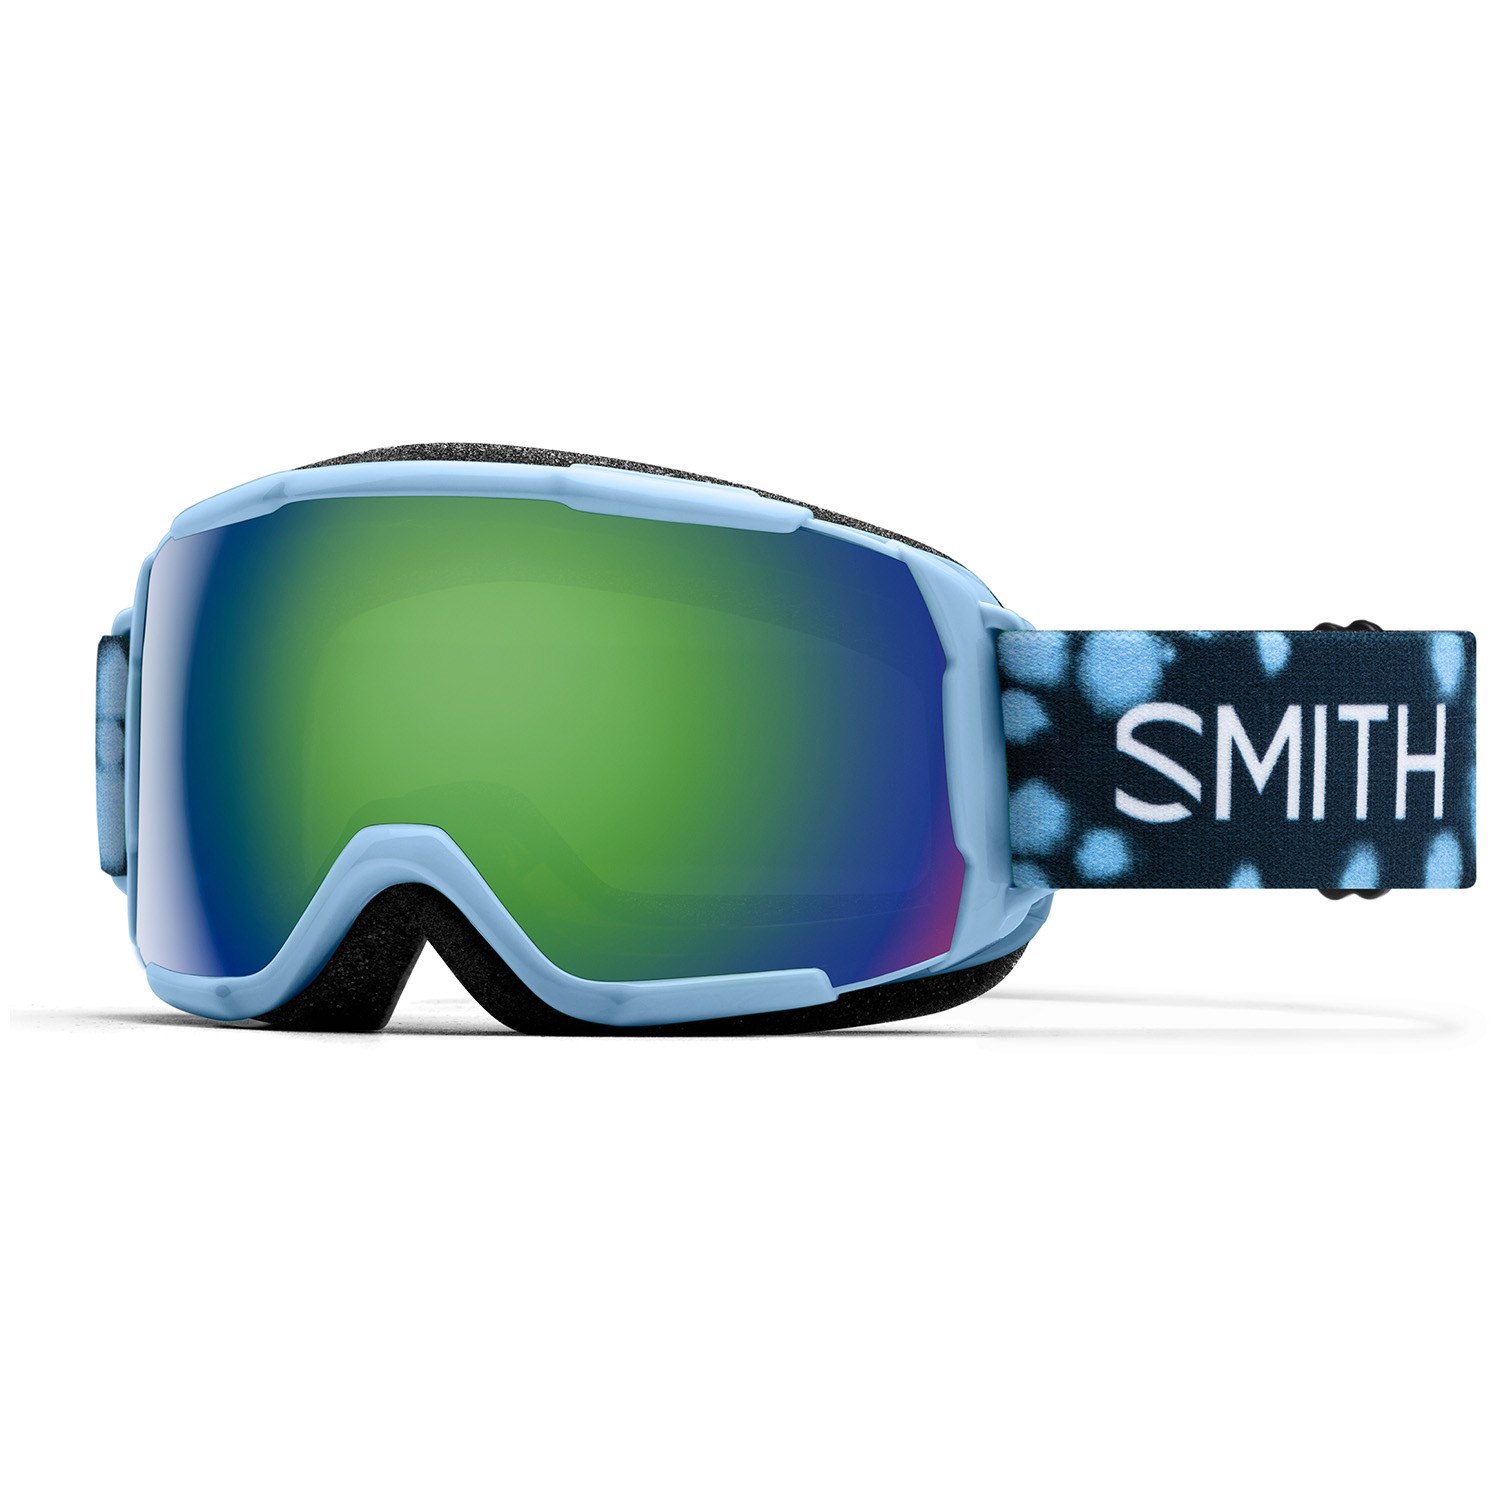 Smith Goggle Size Chart